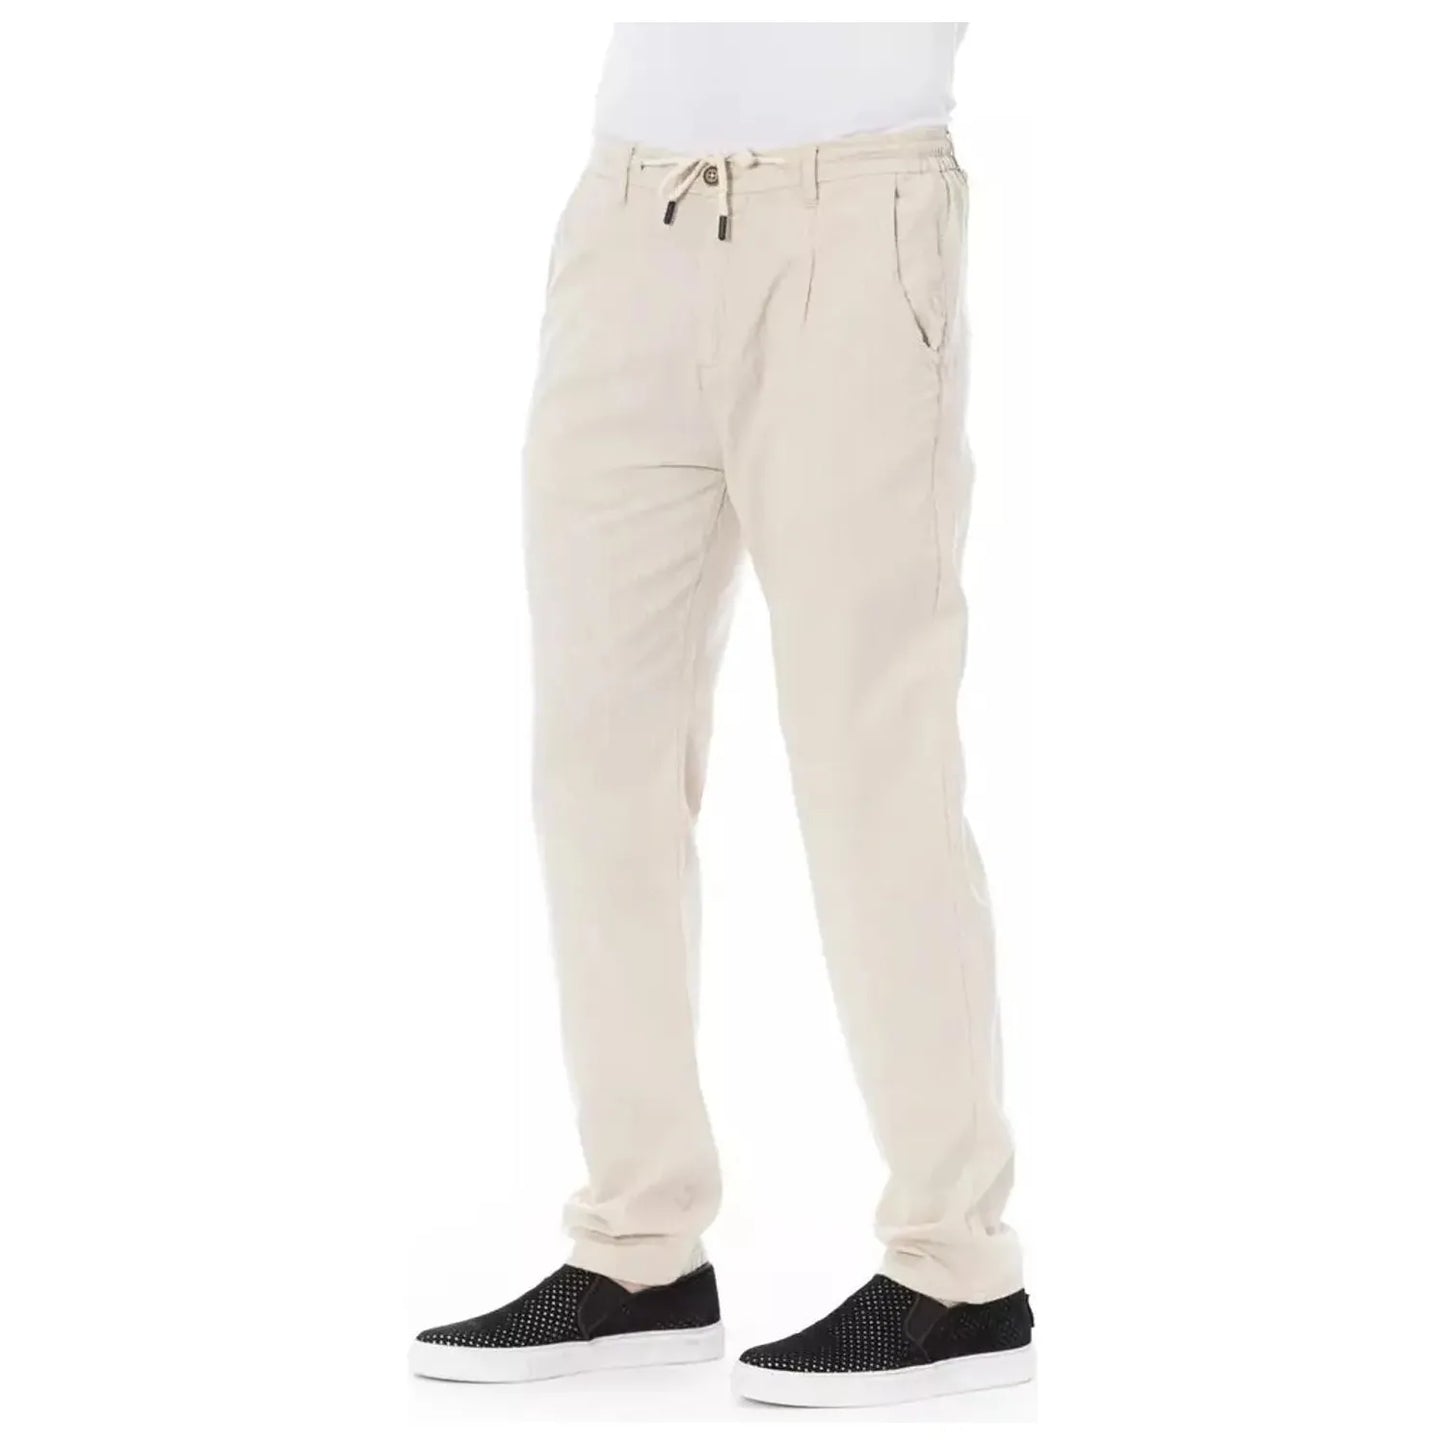 Baldinini Trend Chic Beige Cotton Chino Trousers with Drawstring beige-cotton-jeans-pant-17 product-23141-894902699-22-e2c5a229-a38.webp